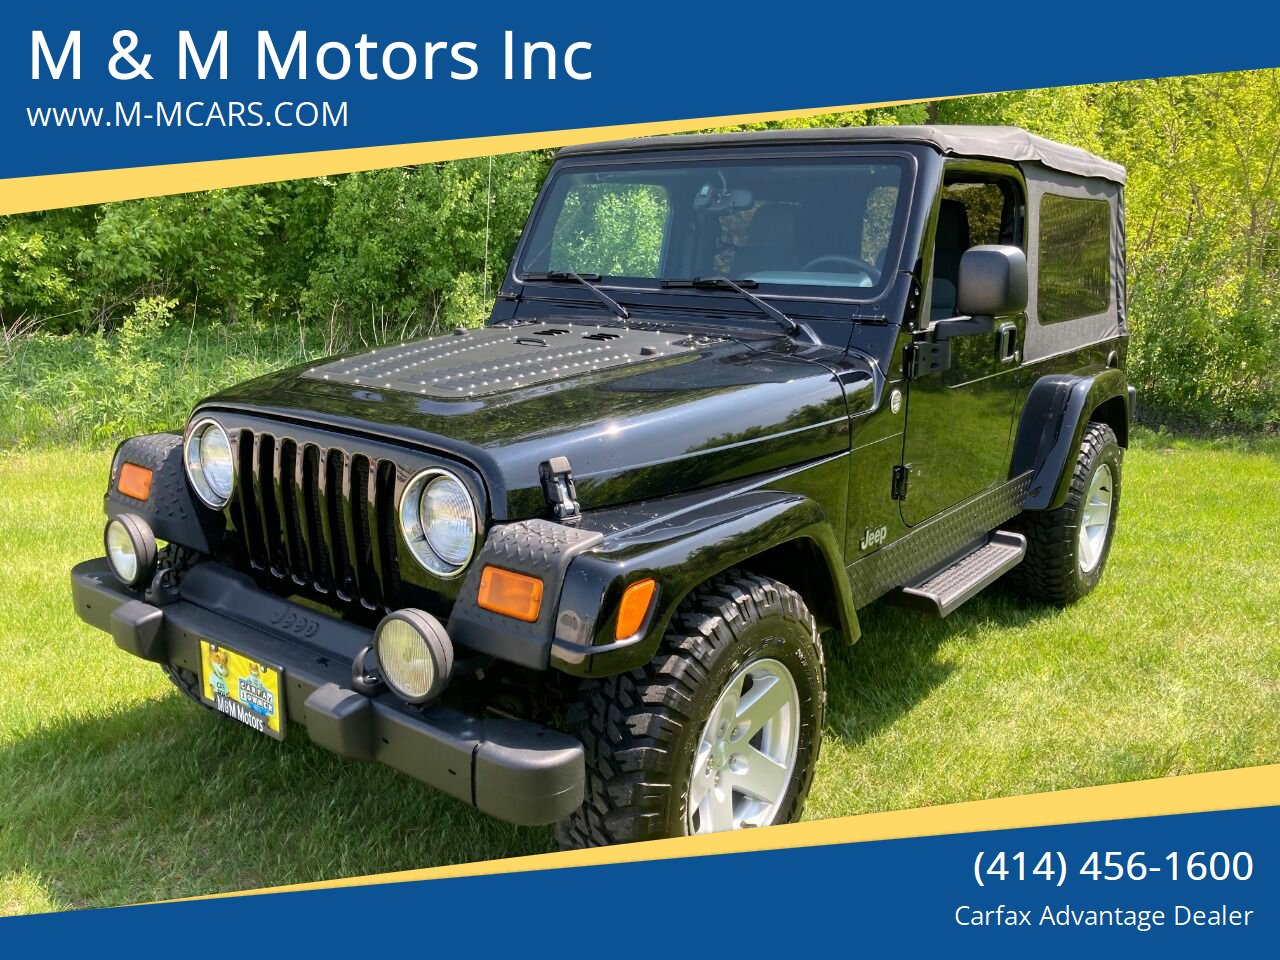 2000 to 2006 Jeep Wrangler For Sale from $499 to $3,980,000